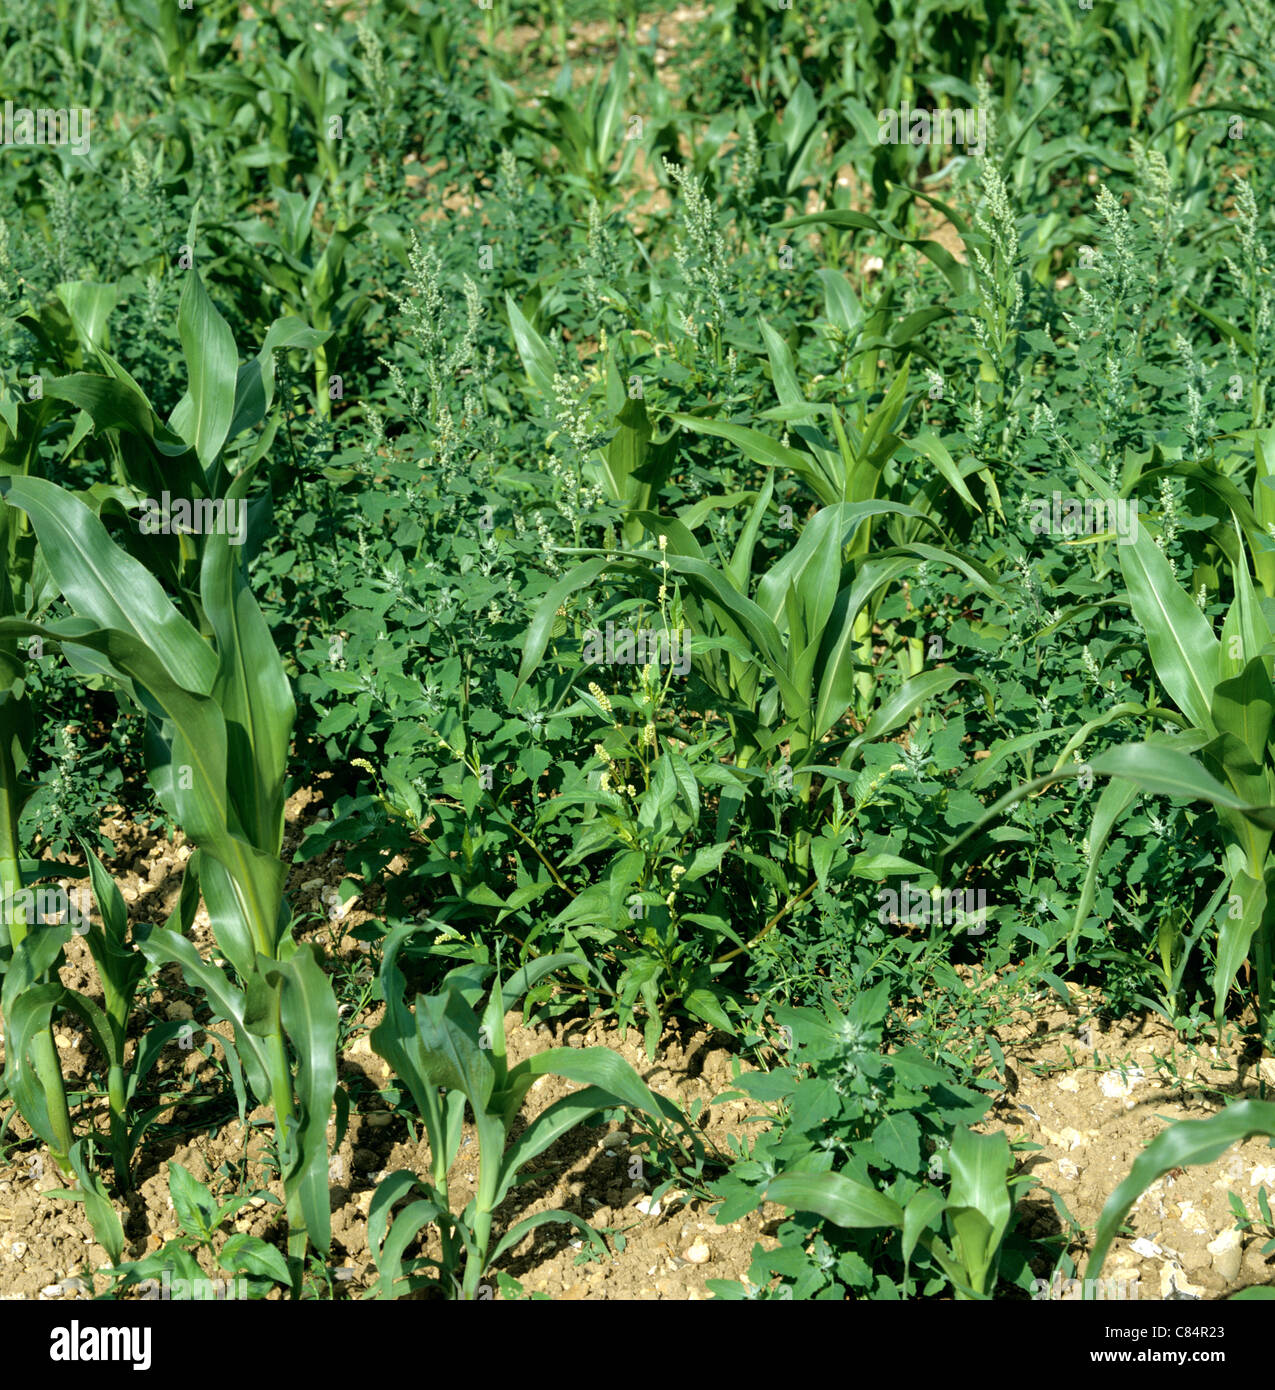 Fat hen (Chenopodium album) flowering weed in young maize or corn crop Stock Photo